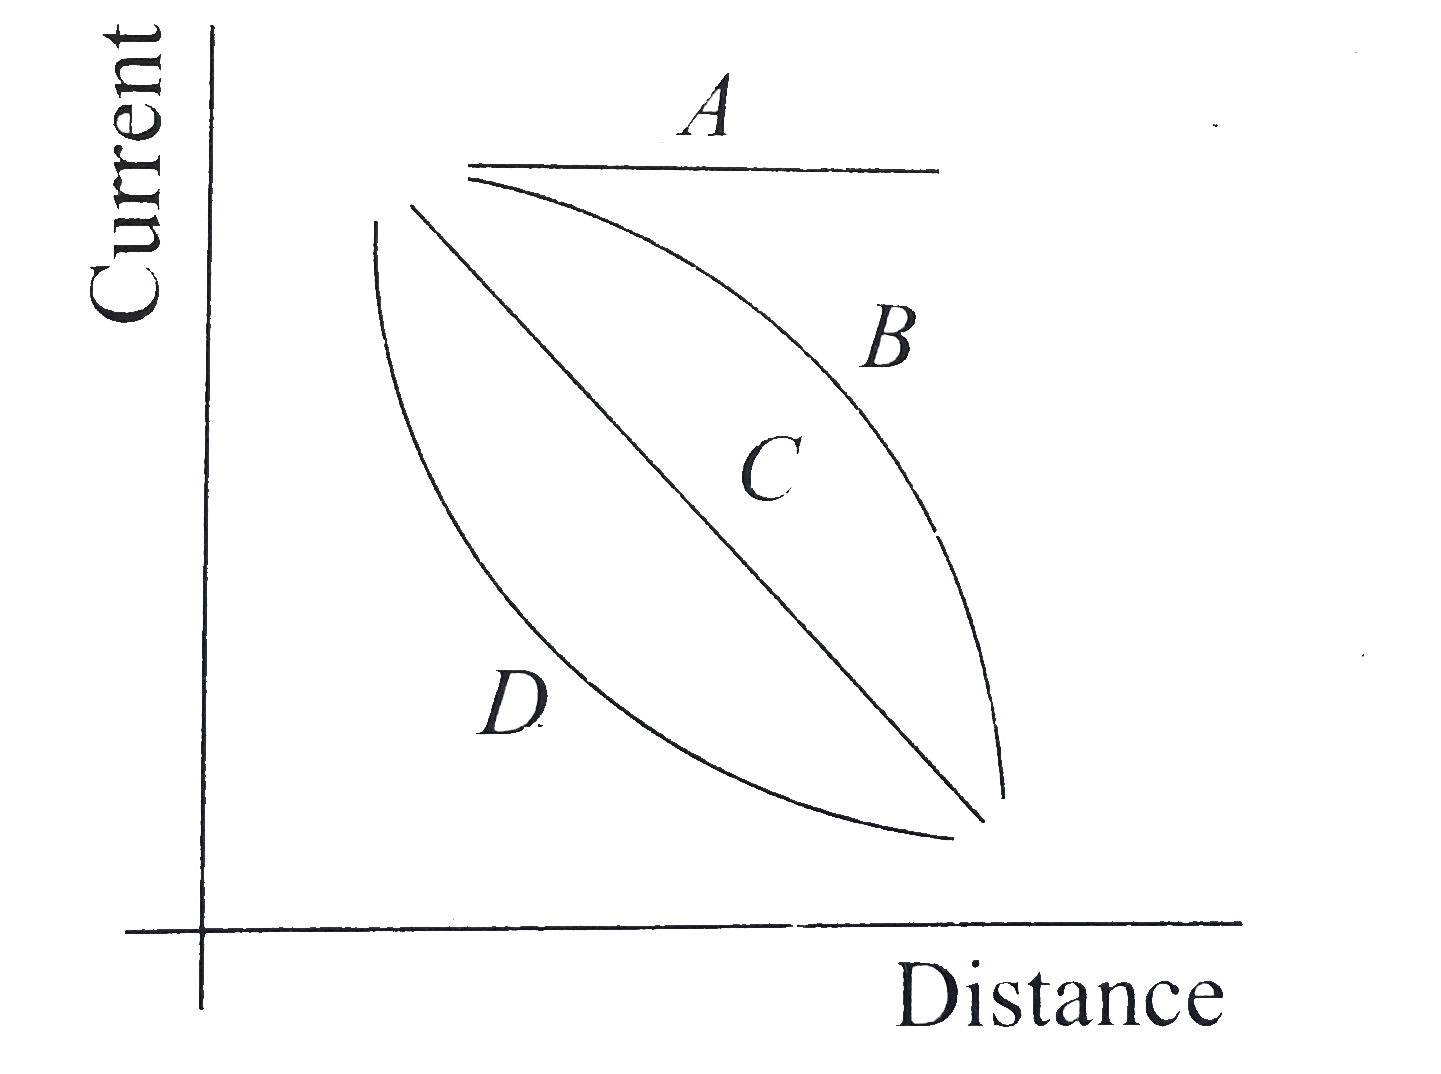 A point source causes photoelectric effect from a small metal plate. Which of the curves in Fig. may represent the saturation photo-current as a function of the distance between the source and the metal?